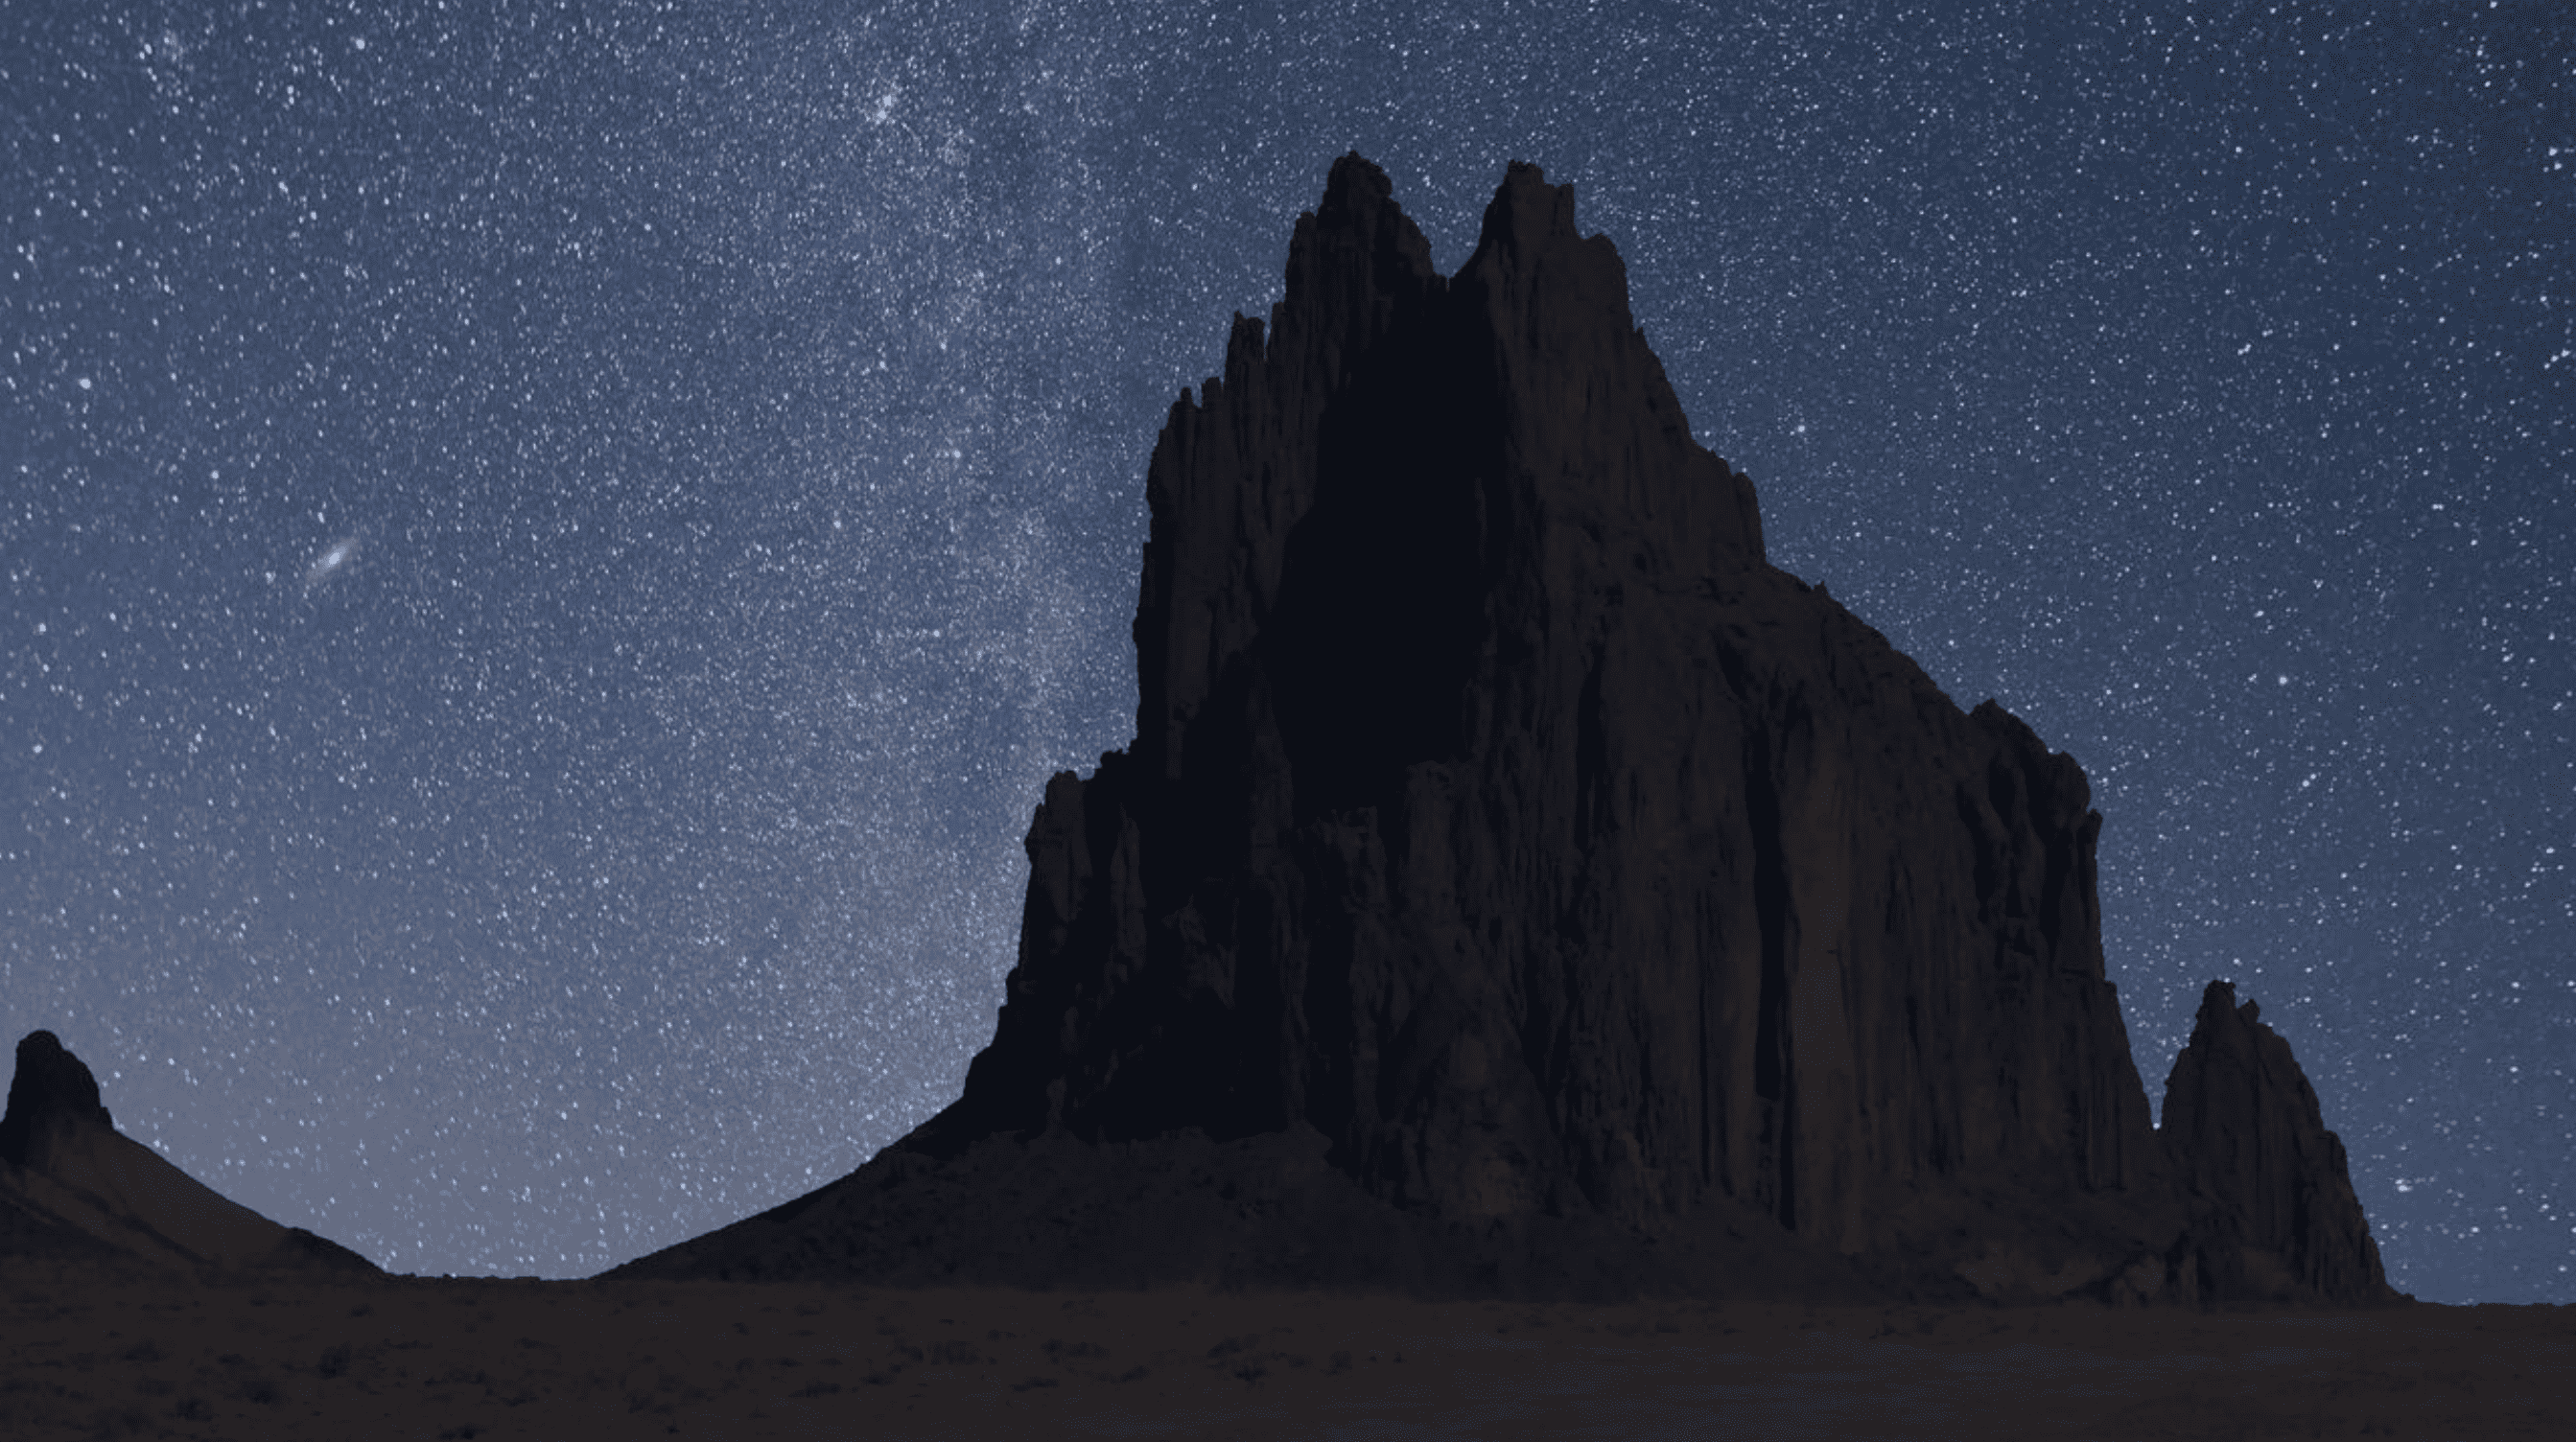 Starry night sky over a silhouetted mountainous landscape.